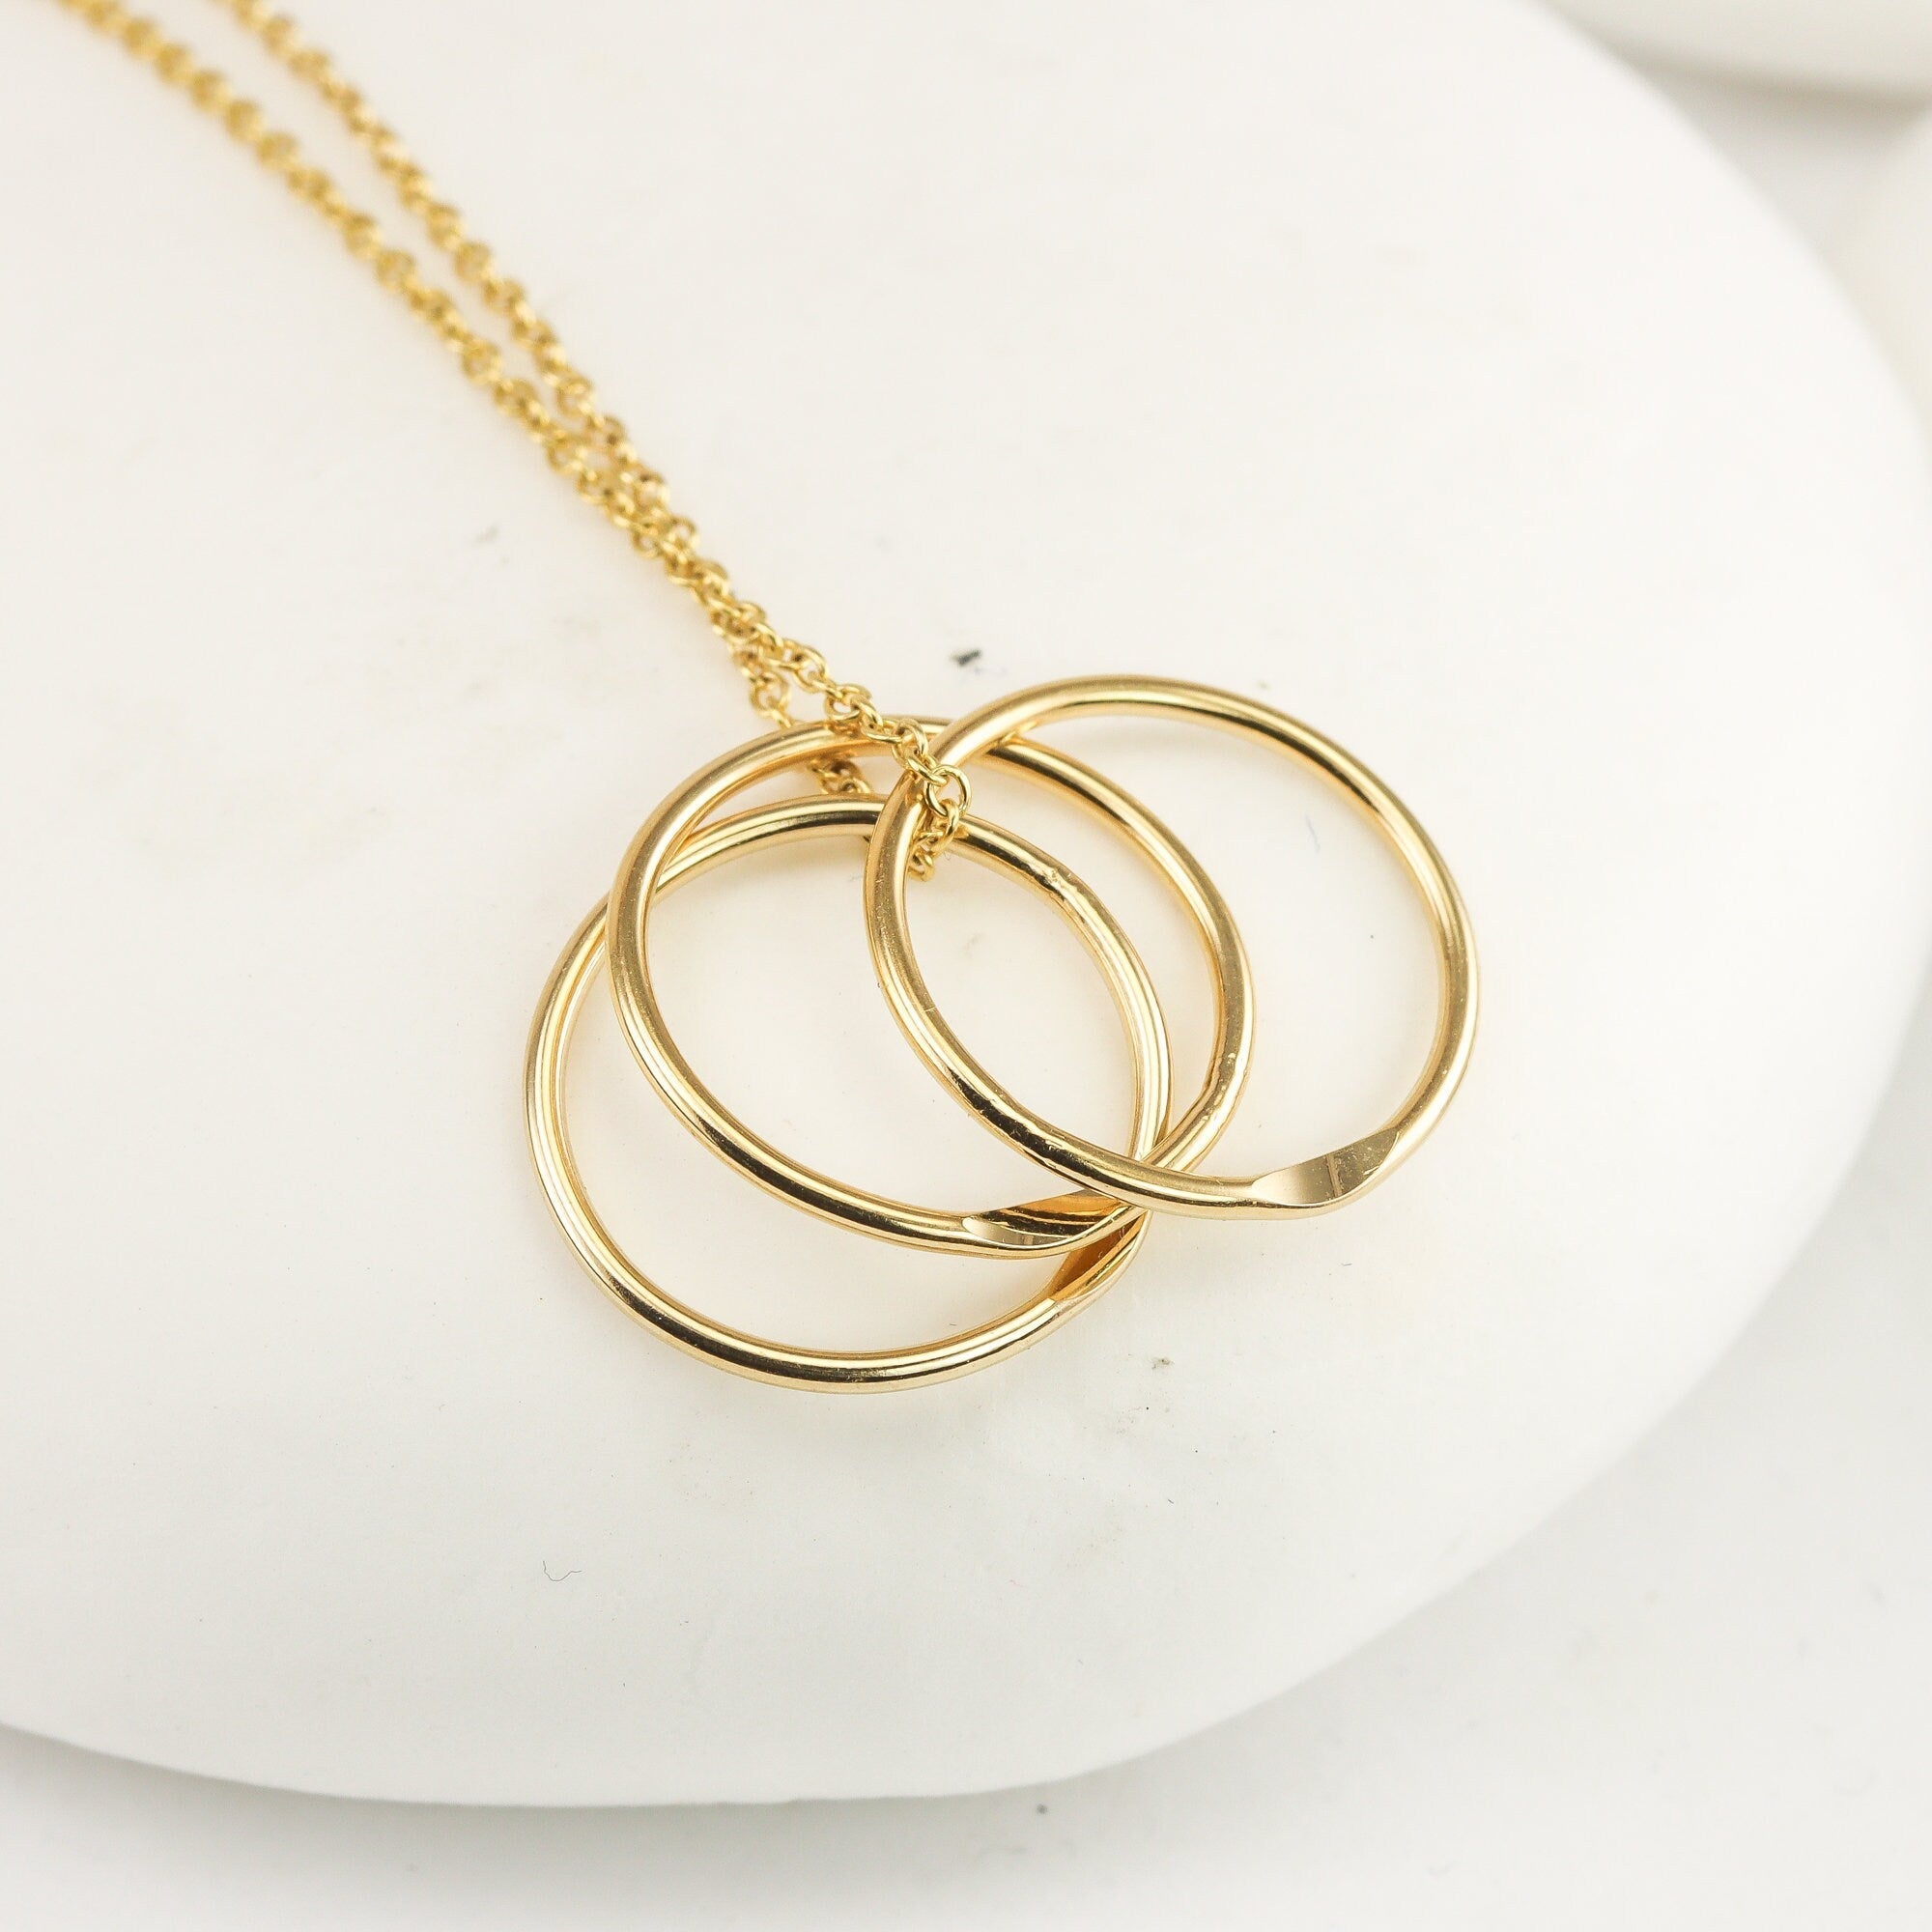 Nesting Rings Necklace